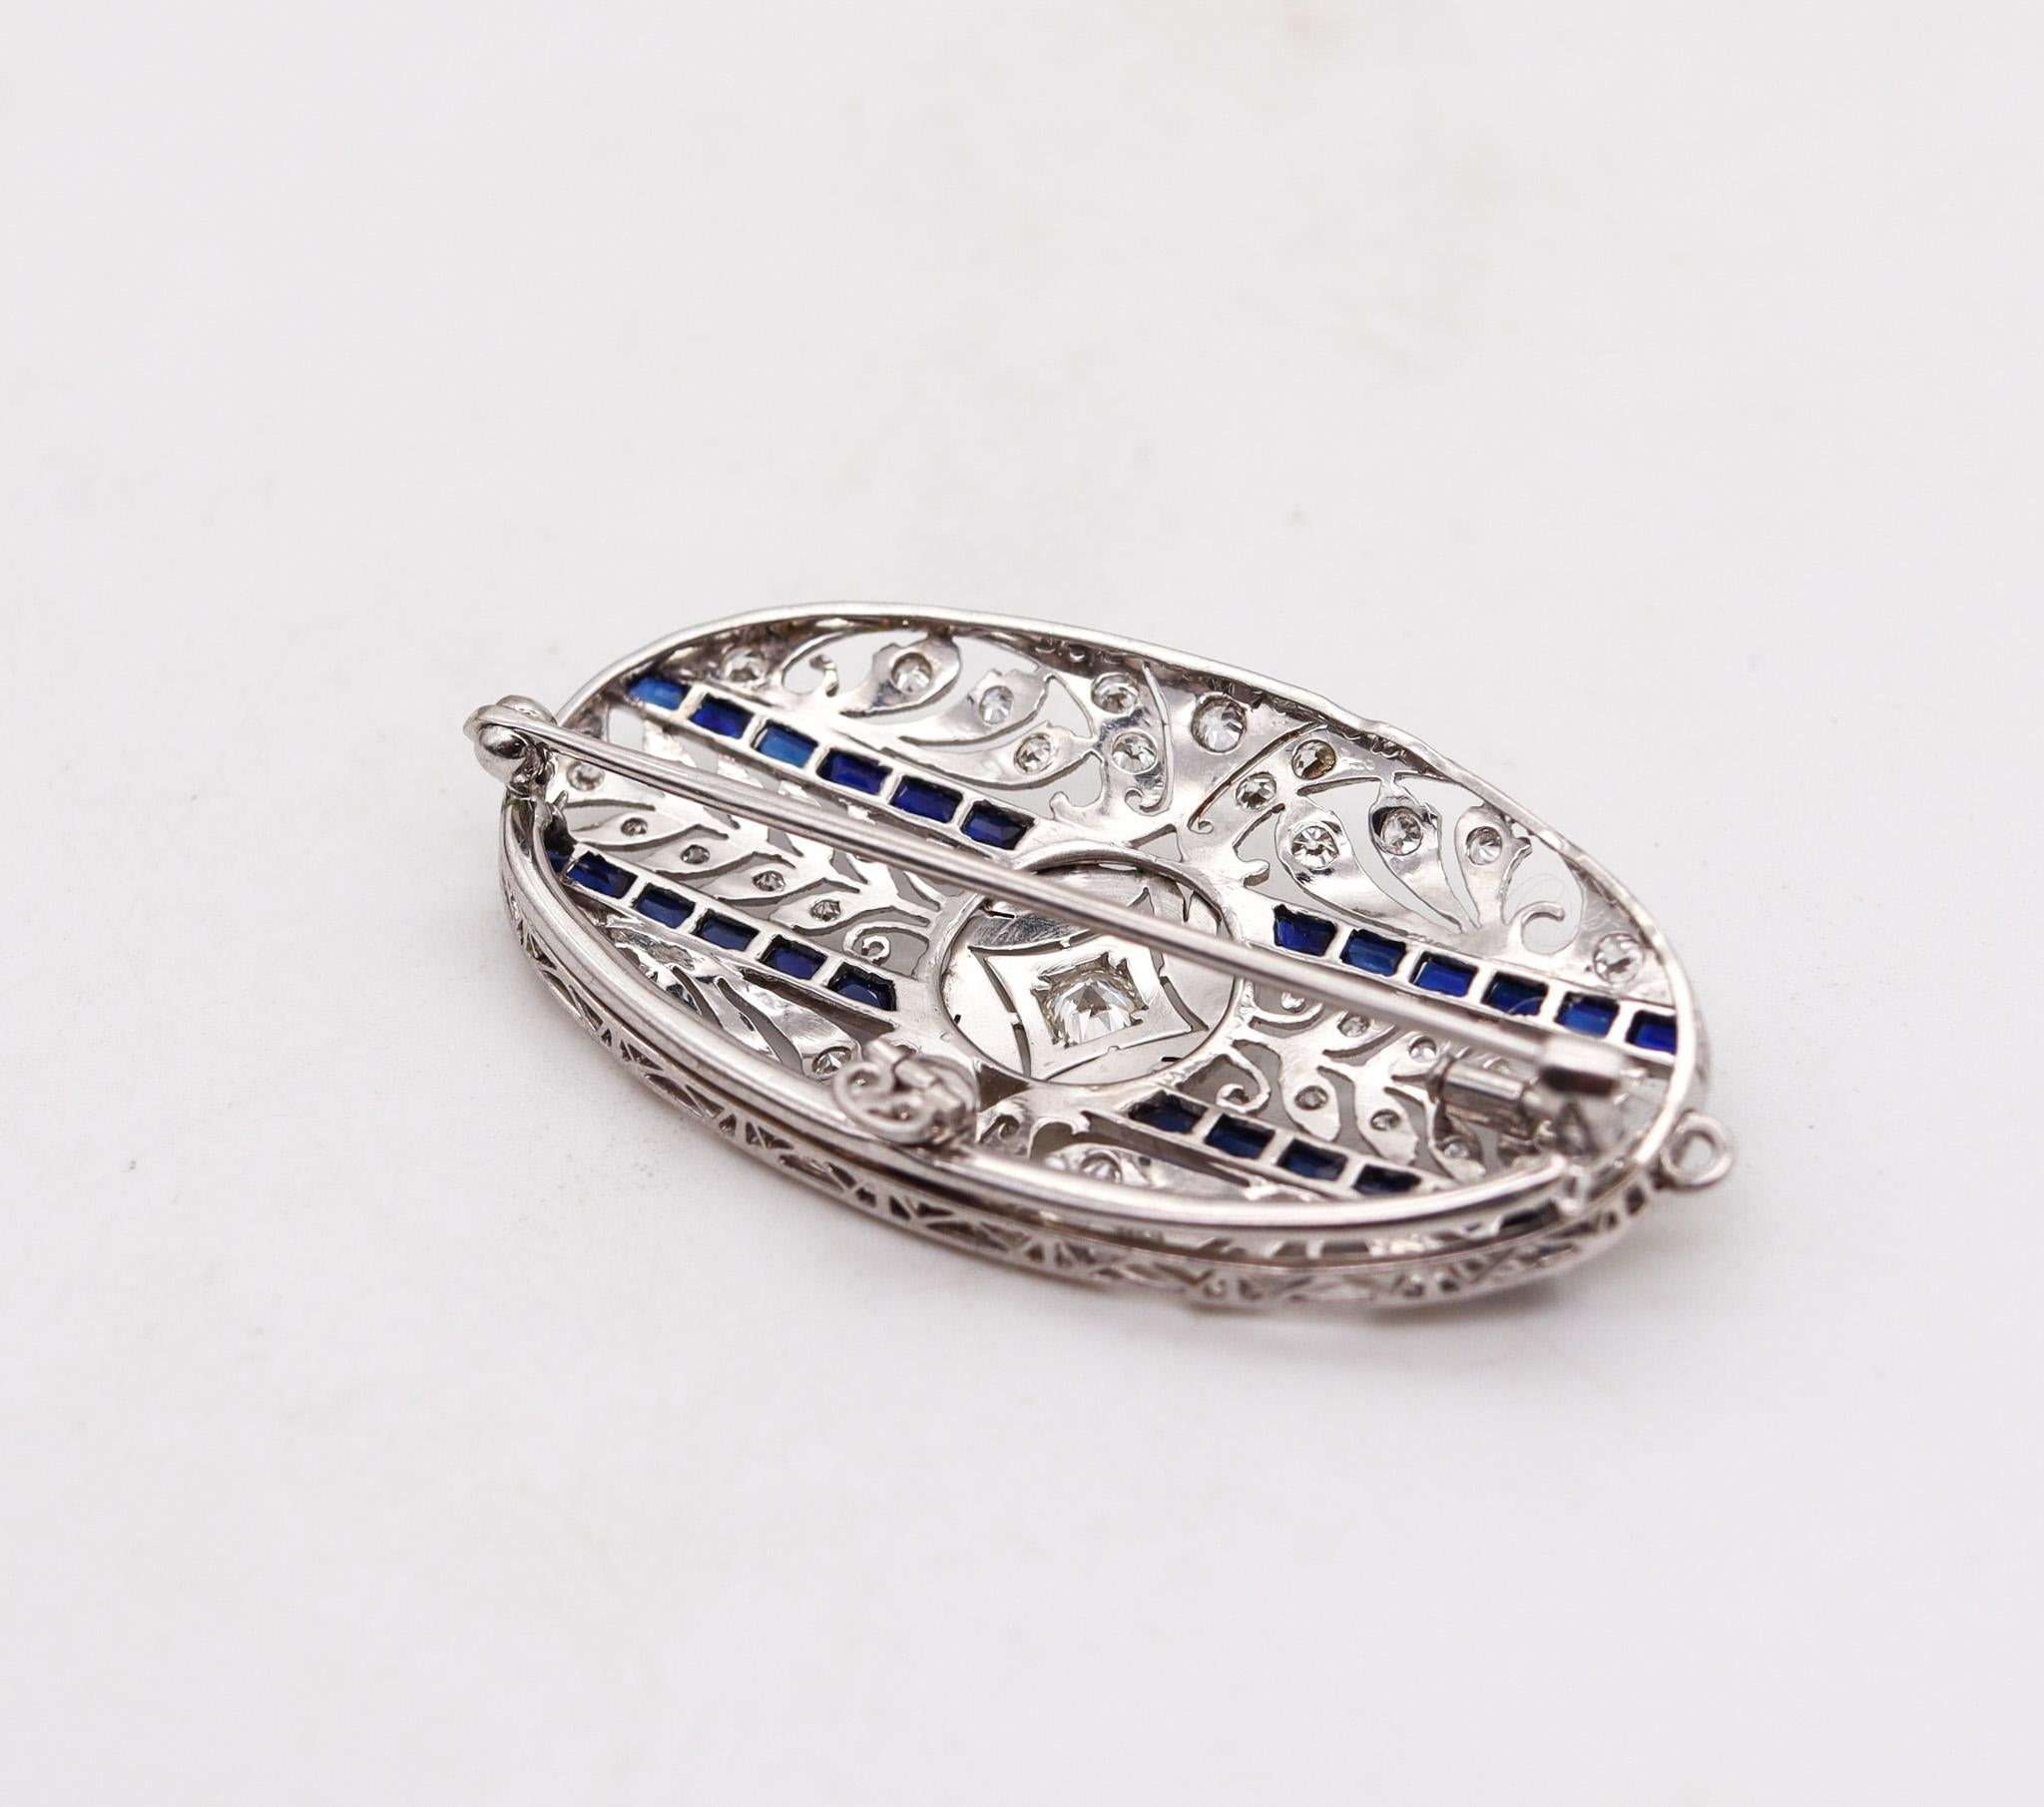 Edwardian 1910 Pendant Brooch in Platinum with 2.35 Ctw in Diamonds and Sapphire In Excellent Condition For Sale In Miami, FL